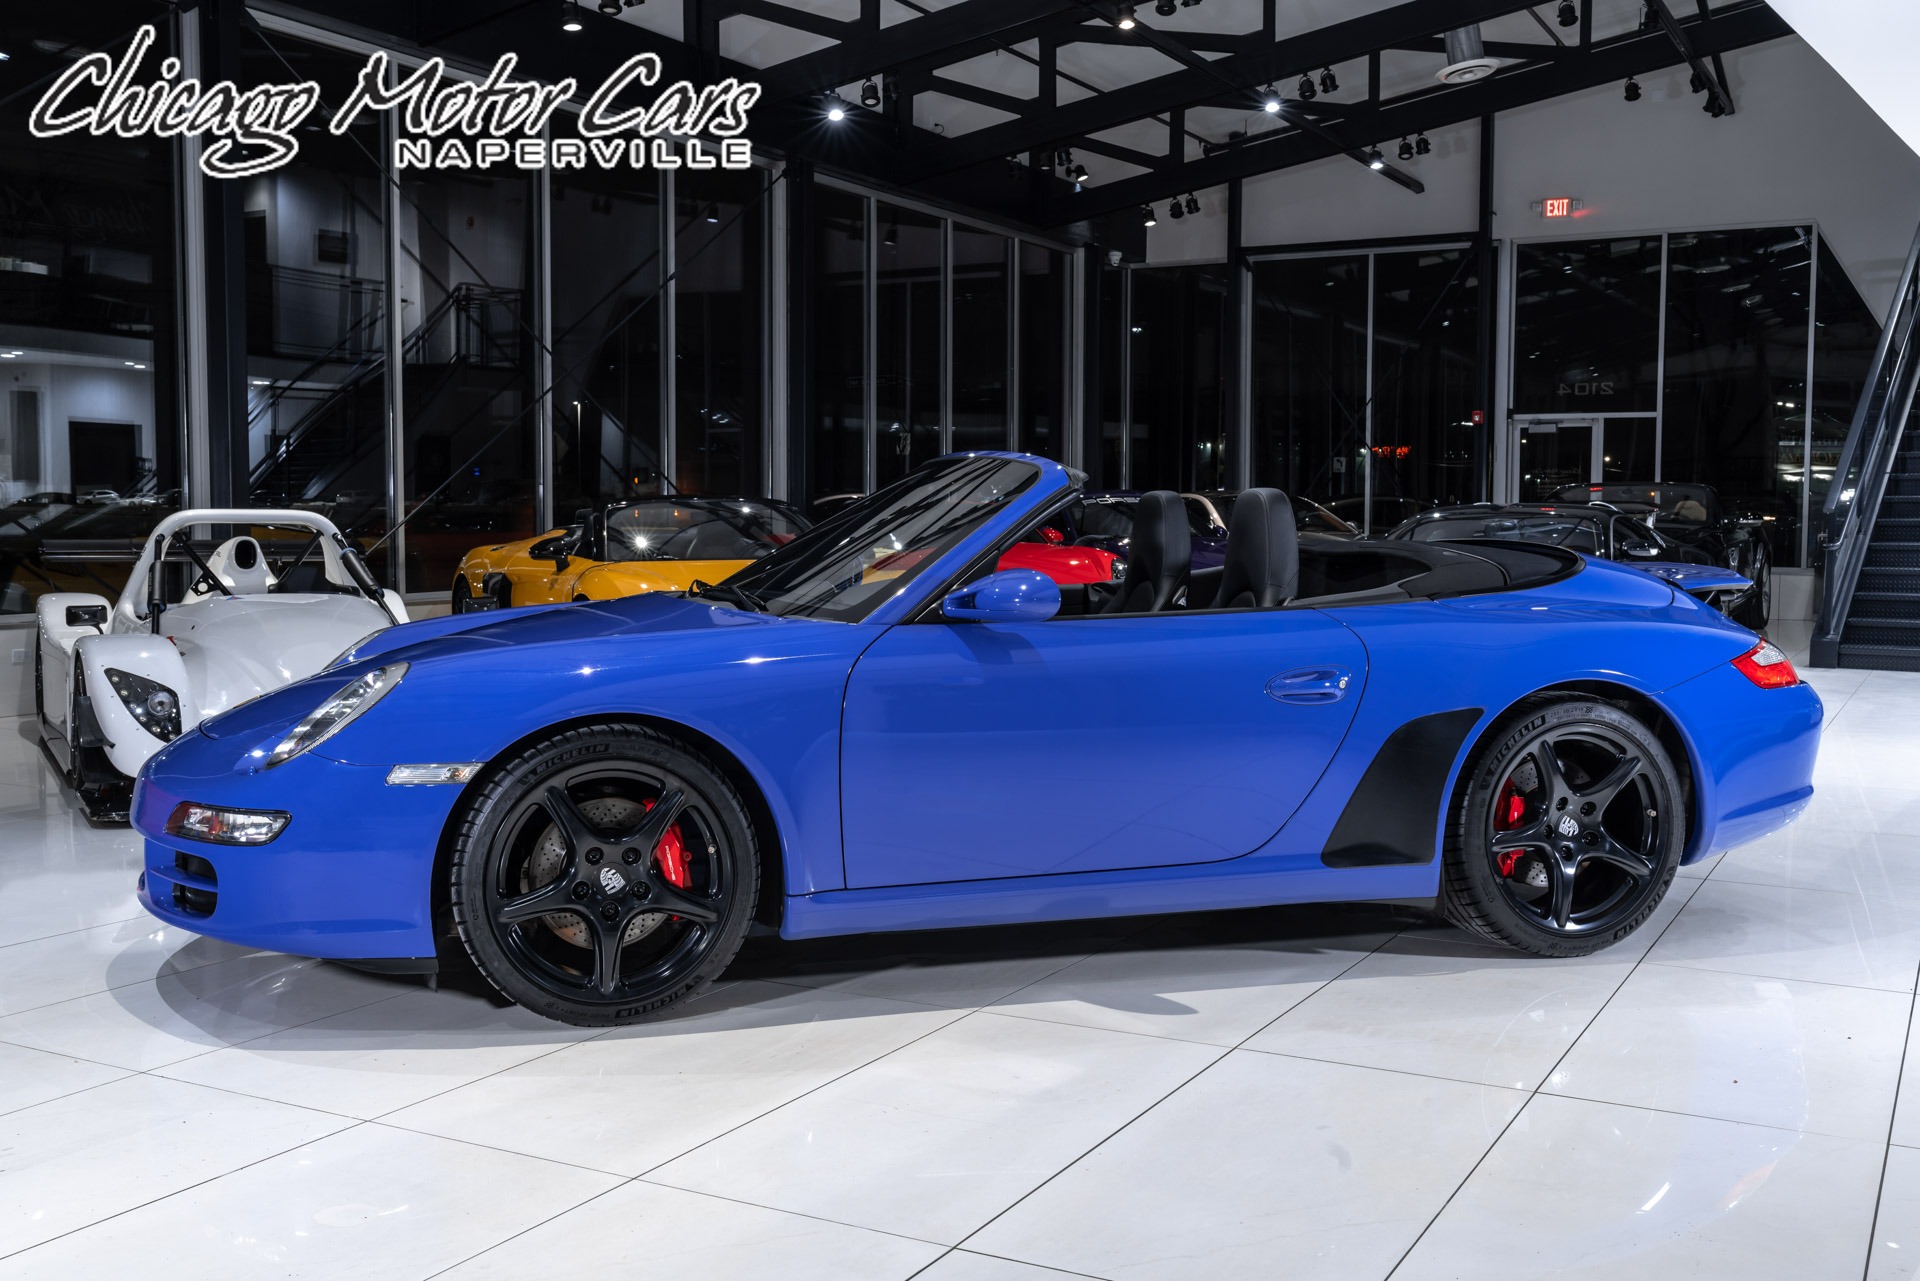 Used 2007 Porsche 911 Carrera S Convertible 997 PTS Maritime Blue! Sport  Exhaust! 6-Speed Manual! For Sale (Special Pricing) | Chicago Motor Cars  Stock #19670A